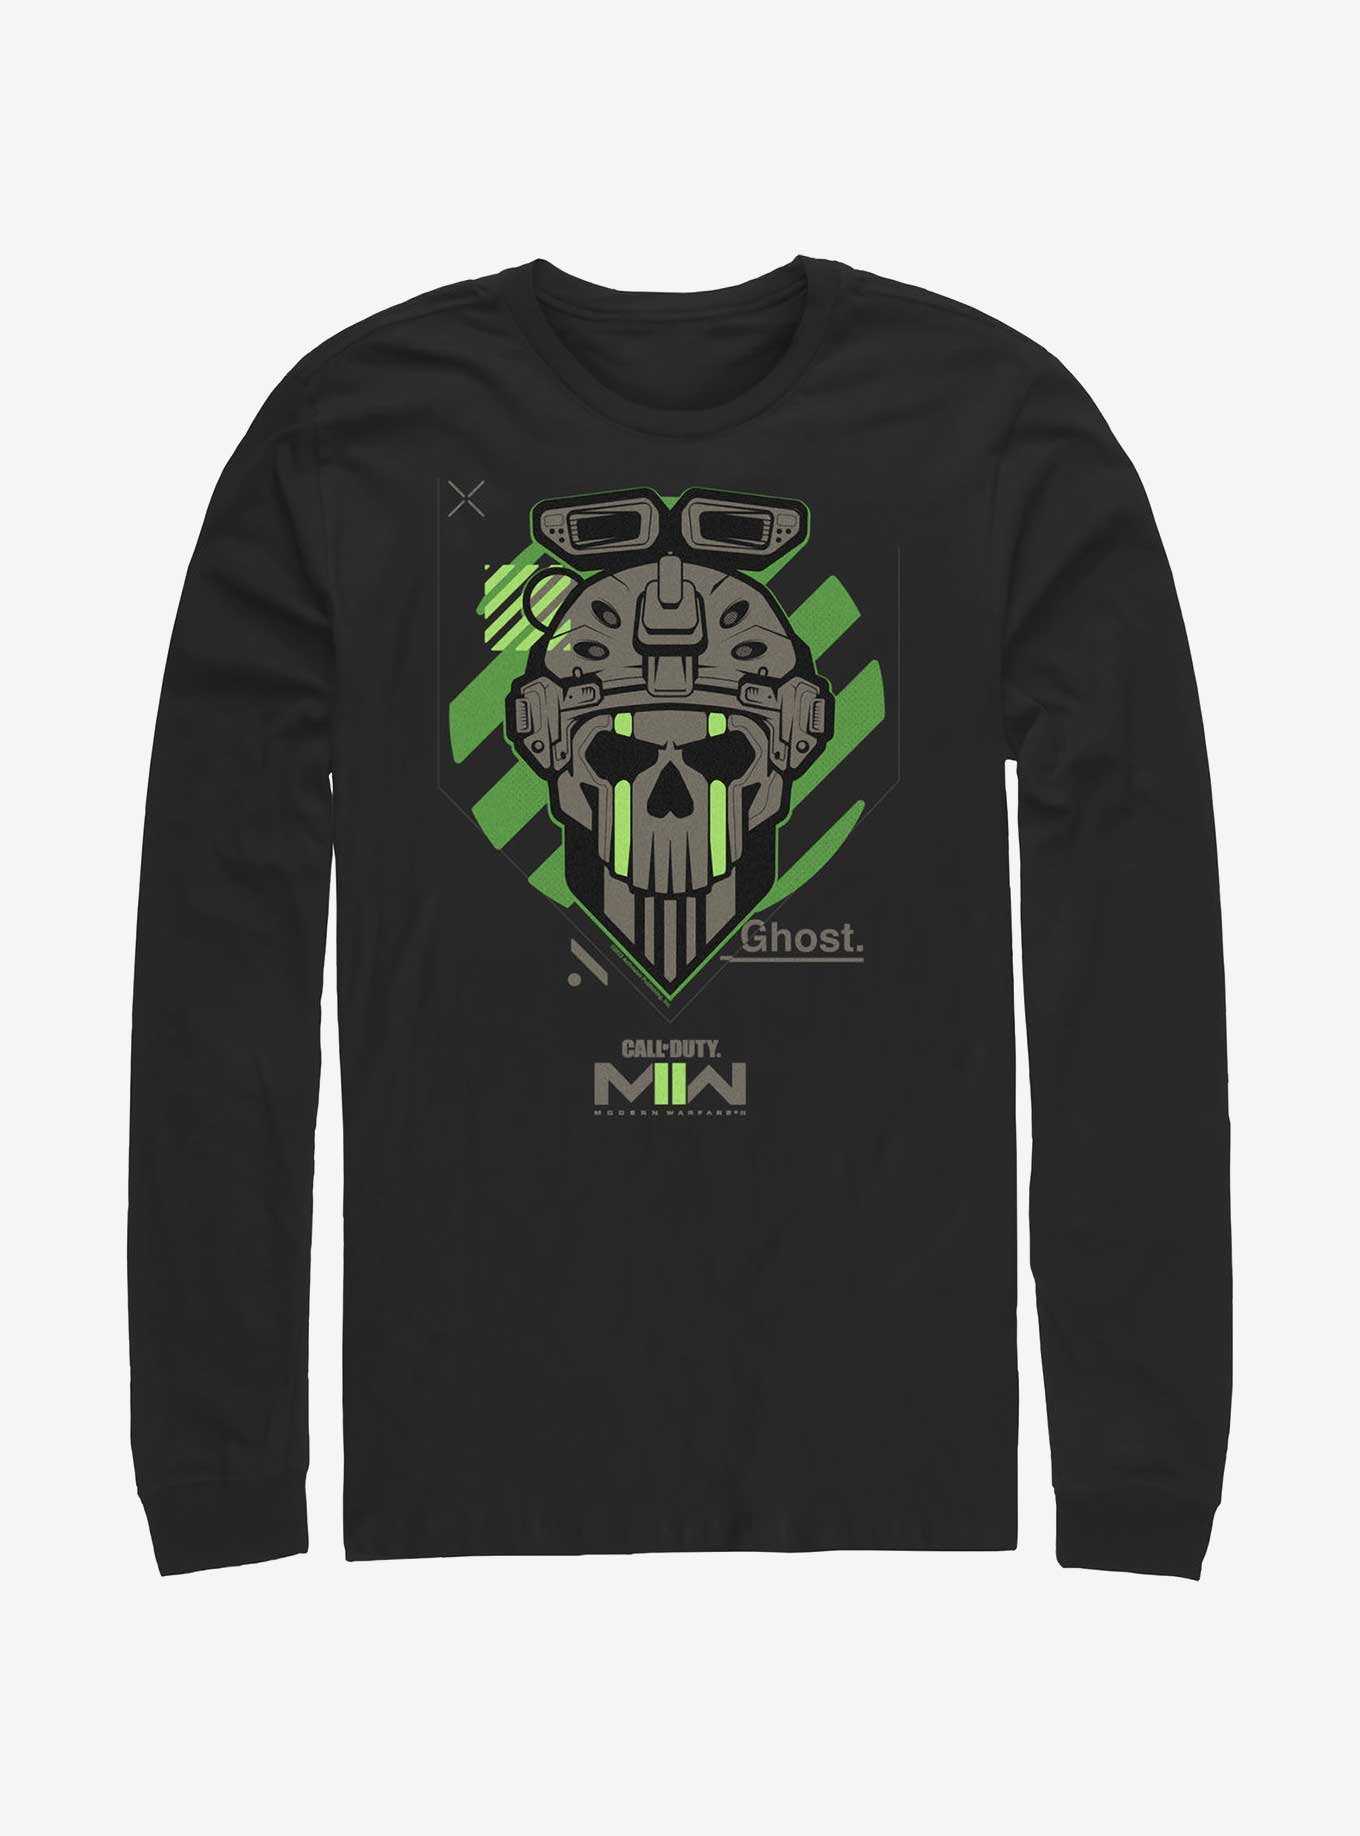 Call of Duty Mask Ghost Long-Sleeve T-Shirt, , hi-res